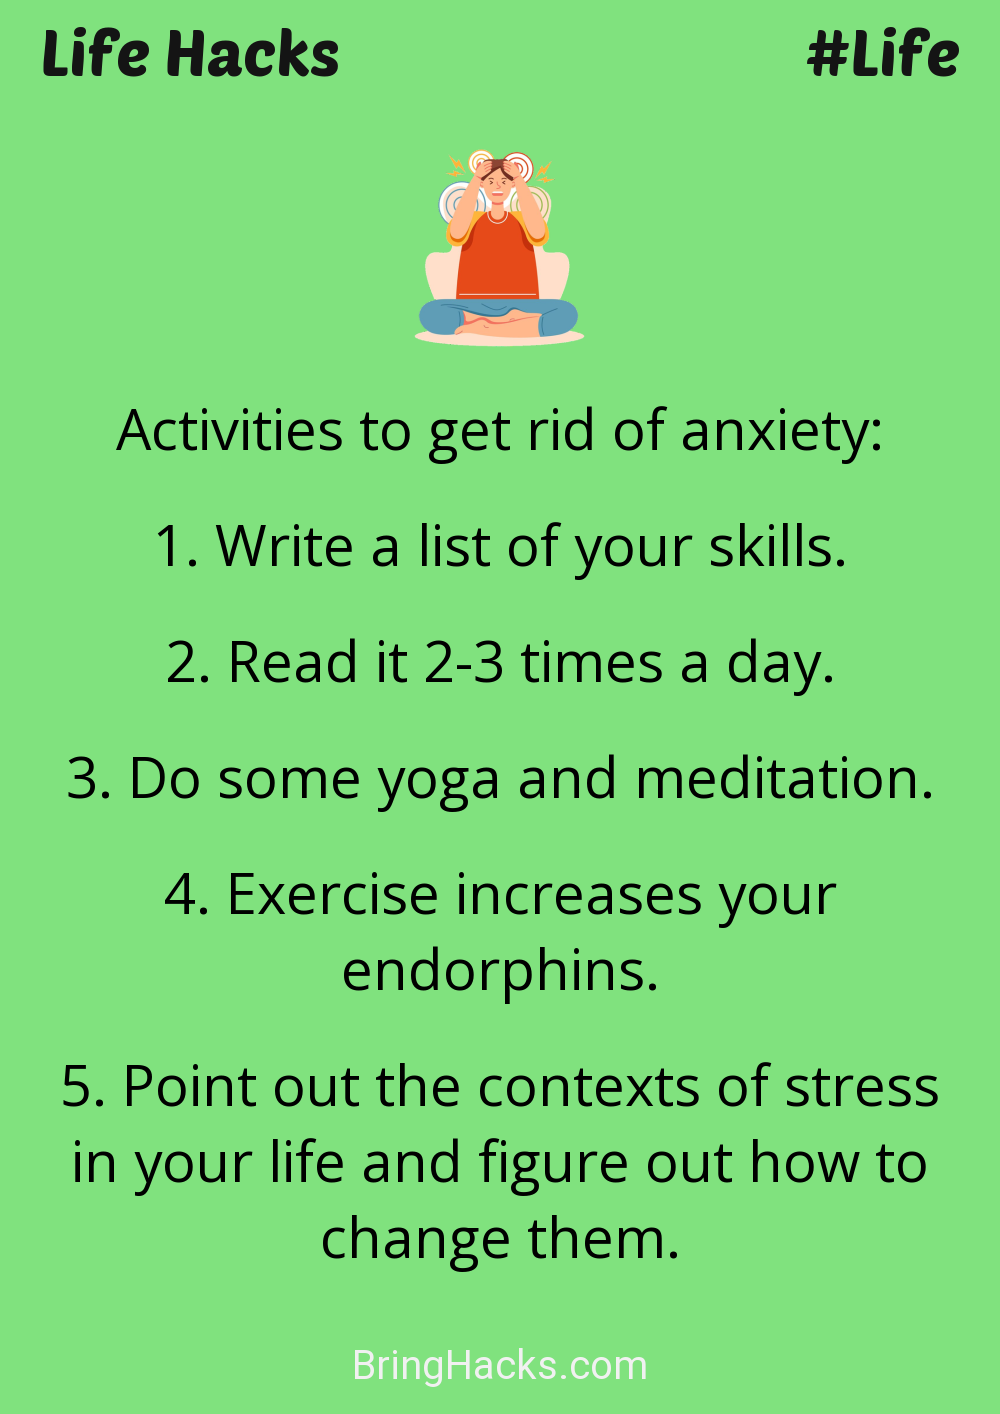 Life Hacks: - Activities to get rid of anxiety:
Write a list of your skills.Read it 2-3 times a day.Do some yoga and meditation.Exercise increases your endorphins.Point out the contexts of stress in your life and figure out how to change them.